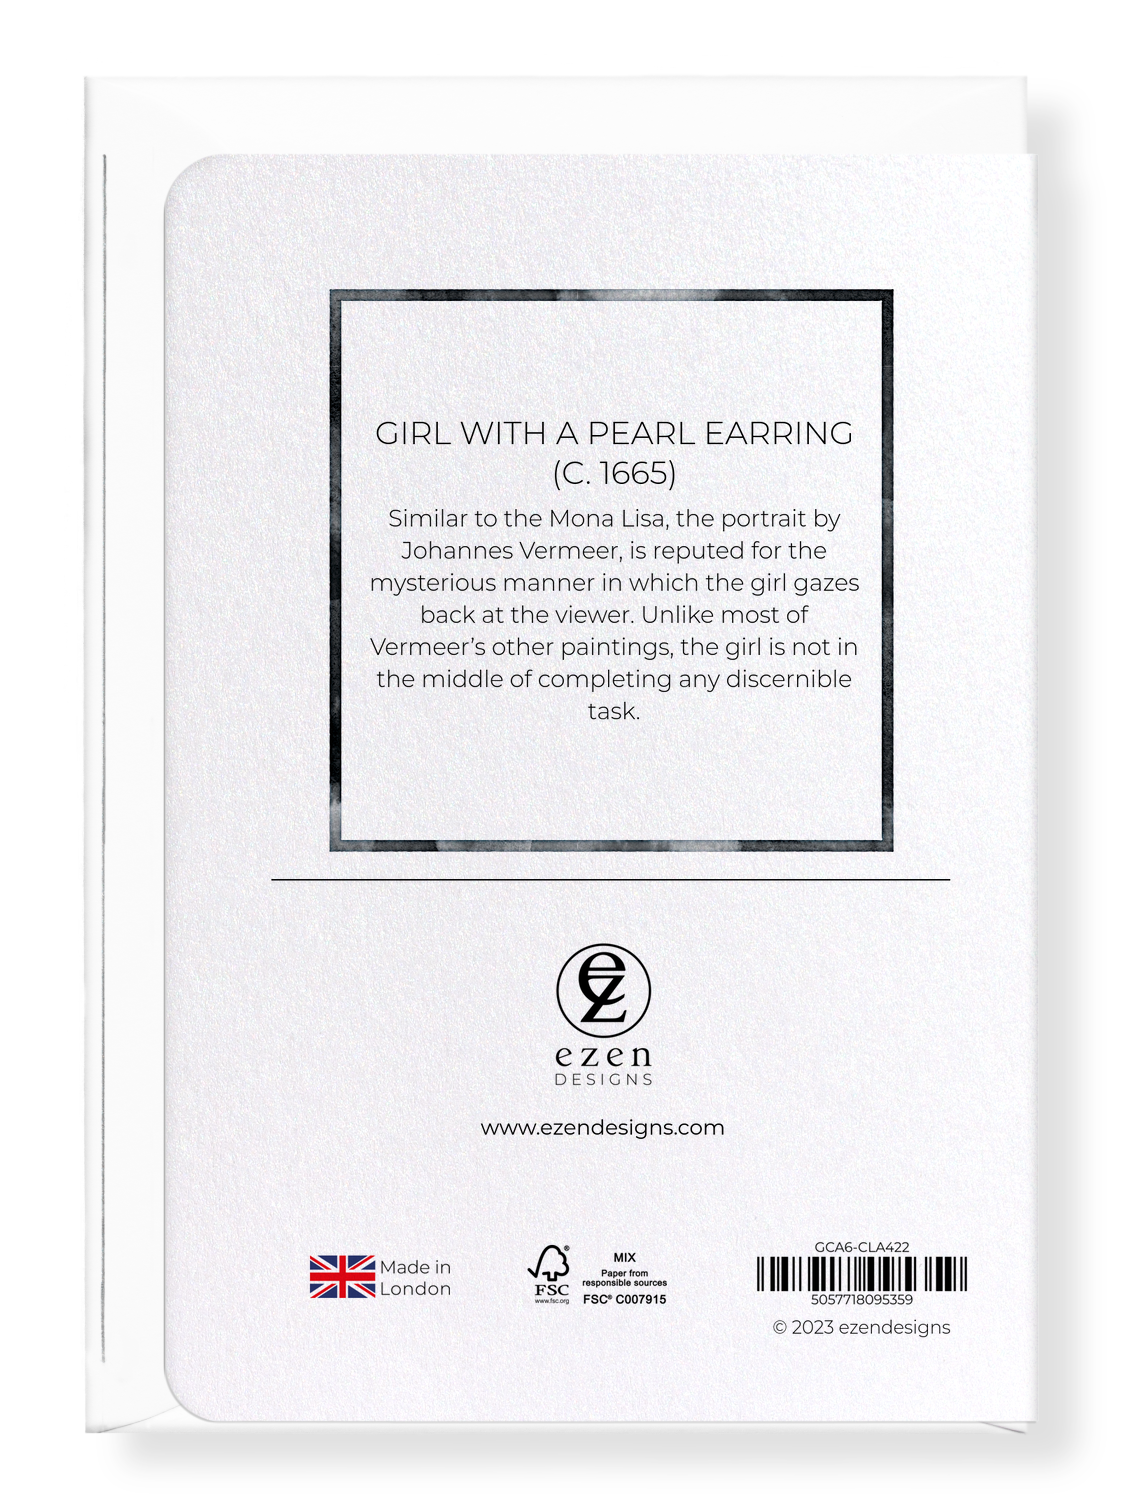 Ezen Designs - Girl with a Pearl Earring (c. 1665) - Greeting Card - Back